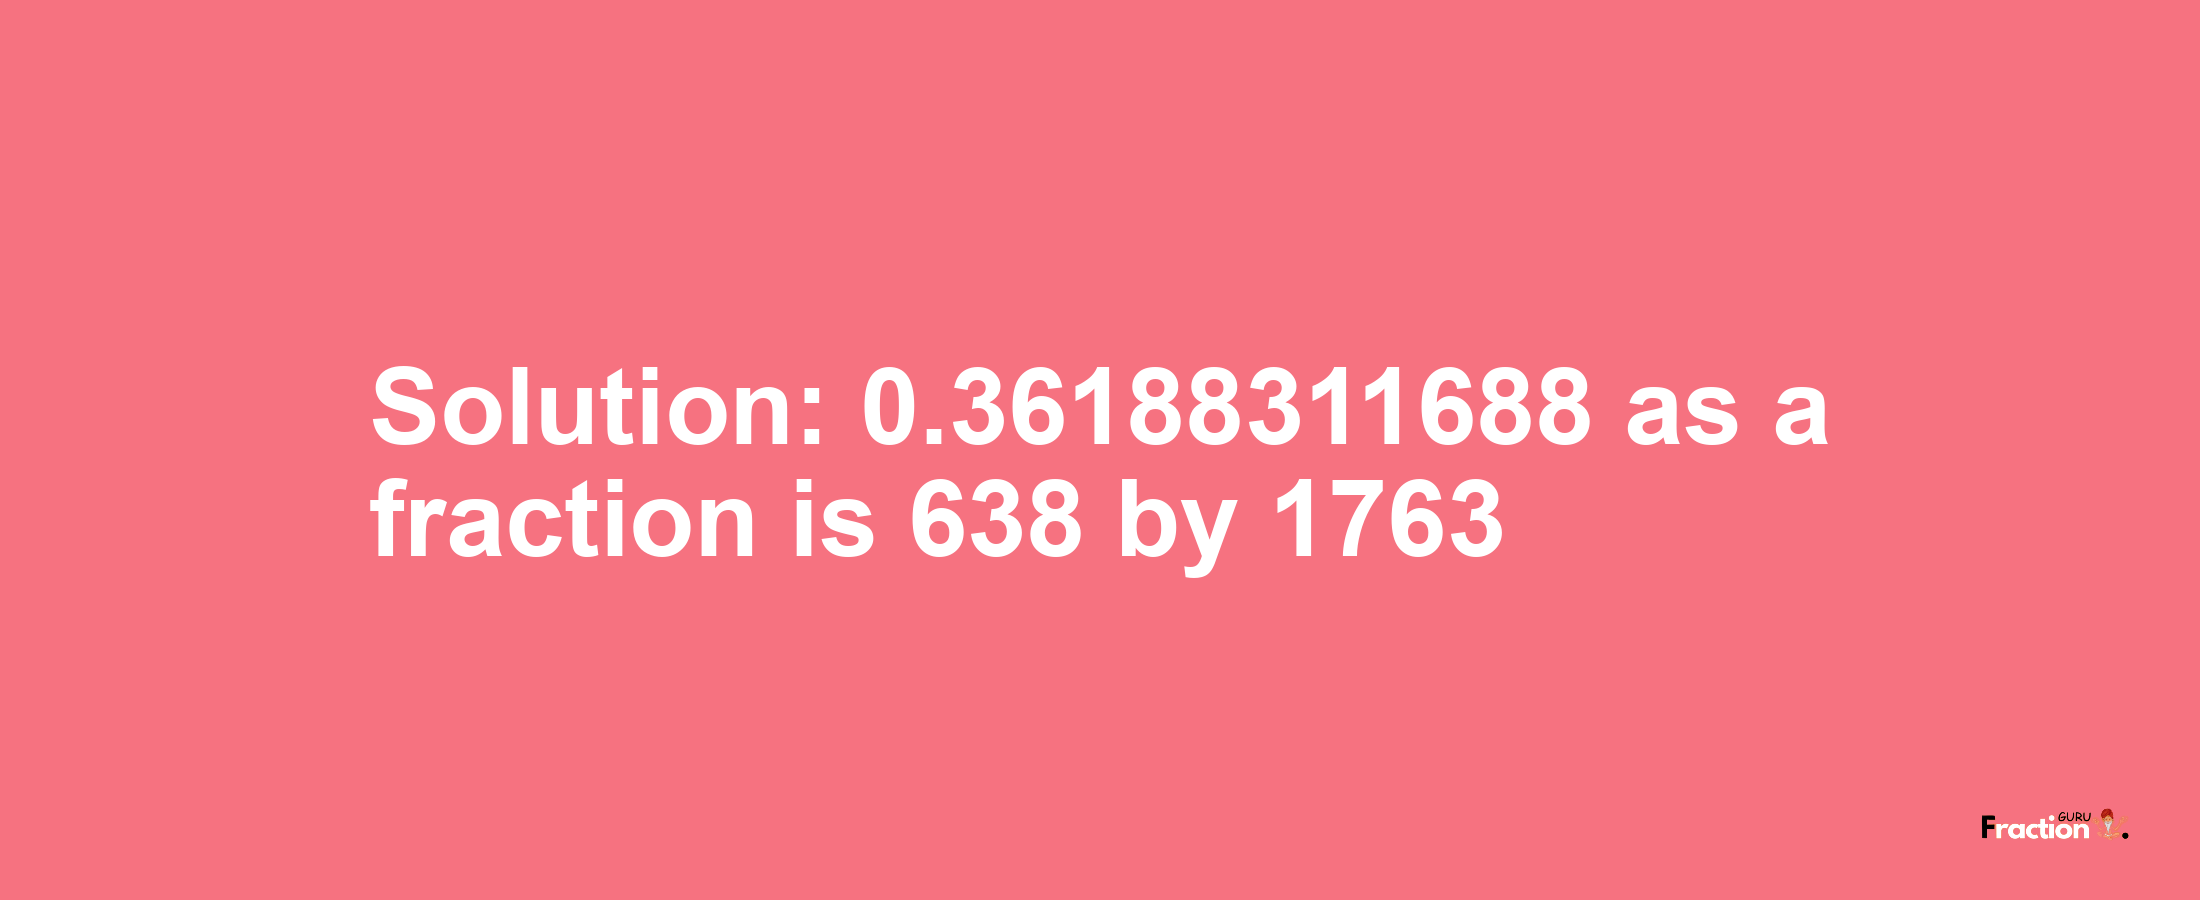 Solution:0.36188311688 as a fraction is 638/1763